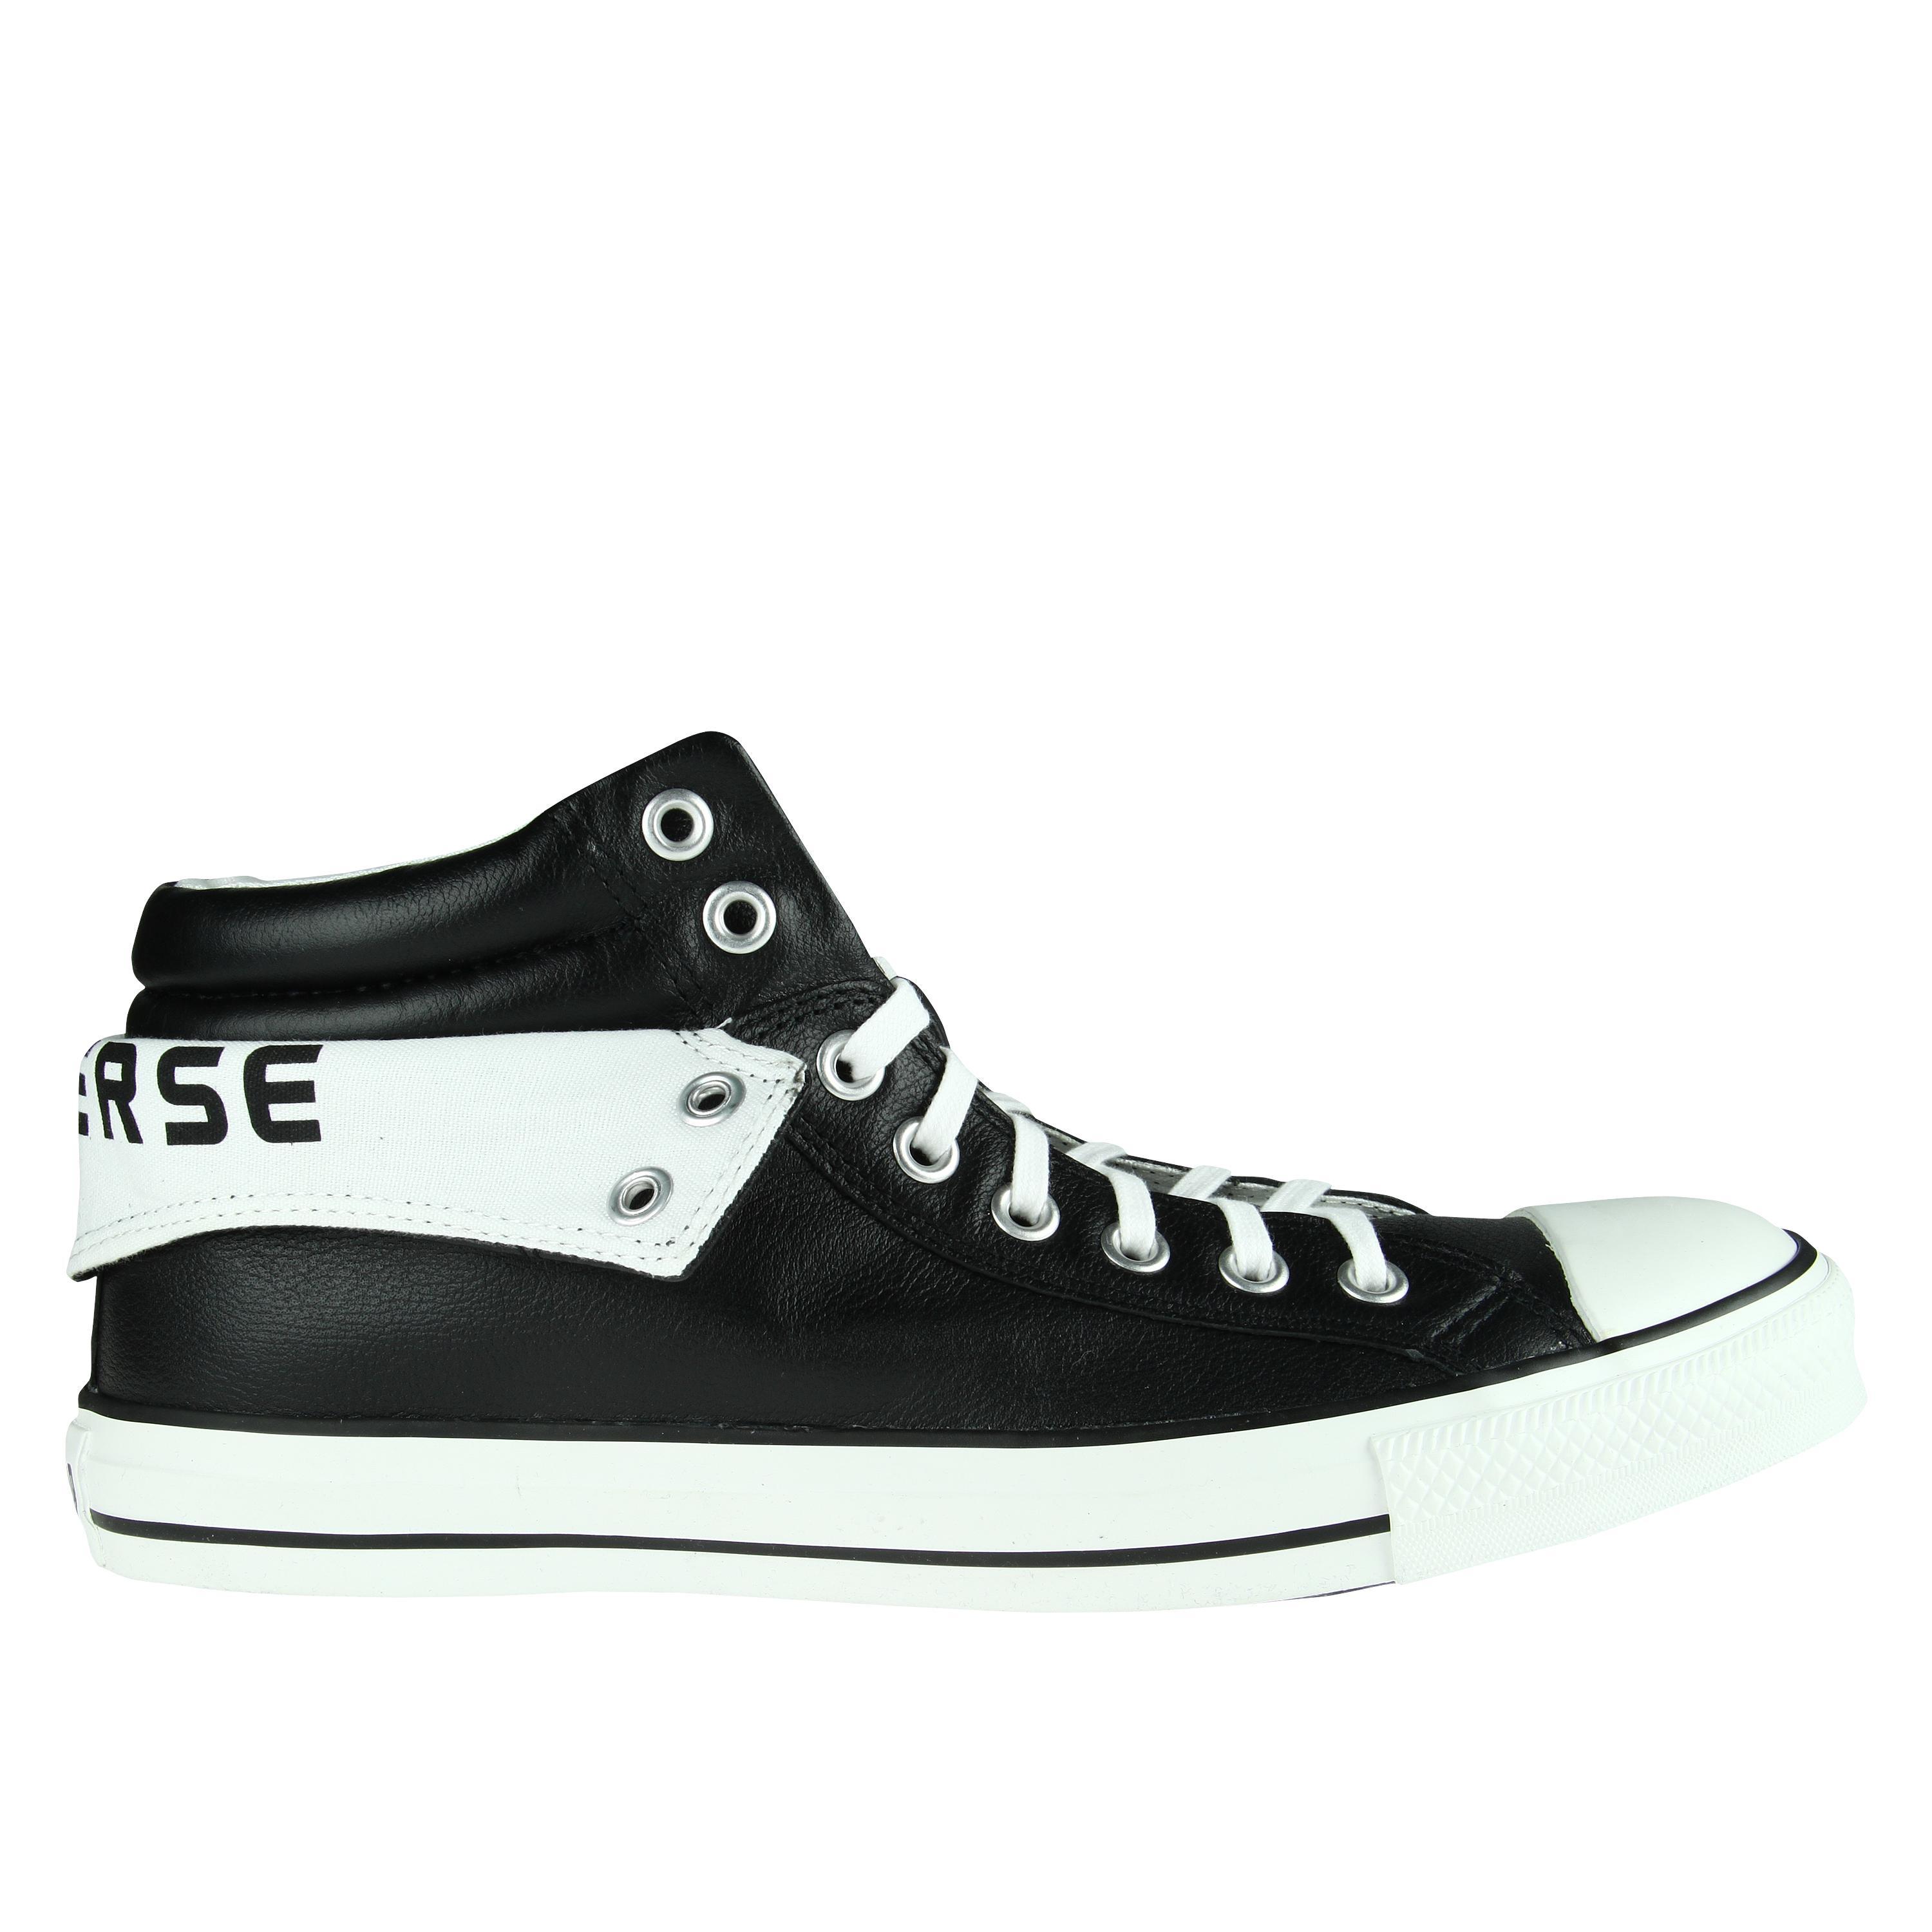 Foto Converse Padded Collar 2 Leather foto 1823